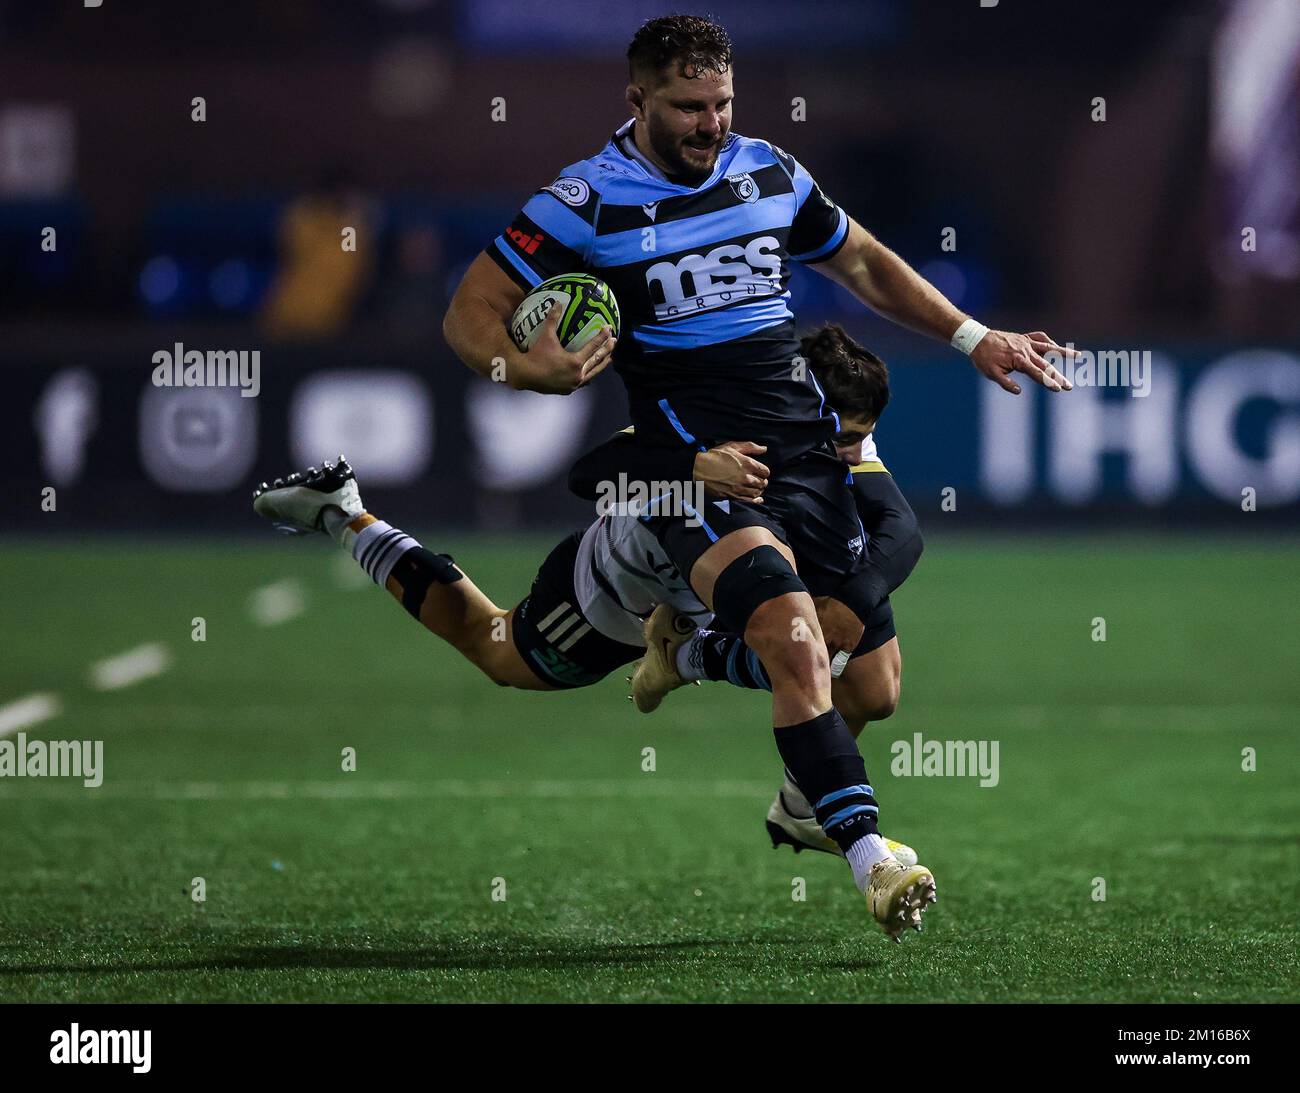 Cardiff Rugby's Thomas Young is tackled by CA Brive's Mathis Ferte in action during the EPCR Challenge Cup match at the Cardiff Arms Park, Cardiff. Picture date: Saturday December 10, 2022. Stock Photo